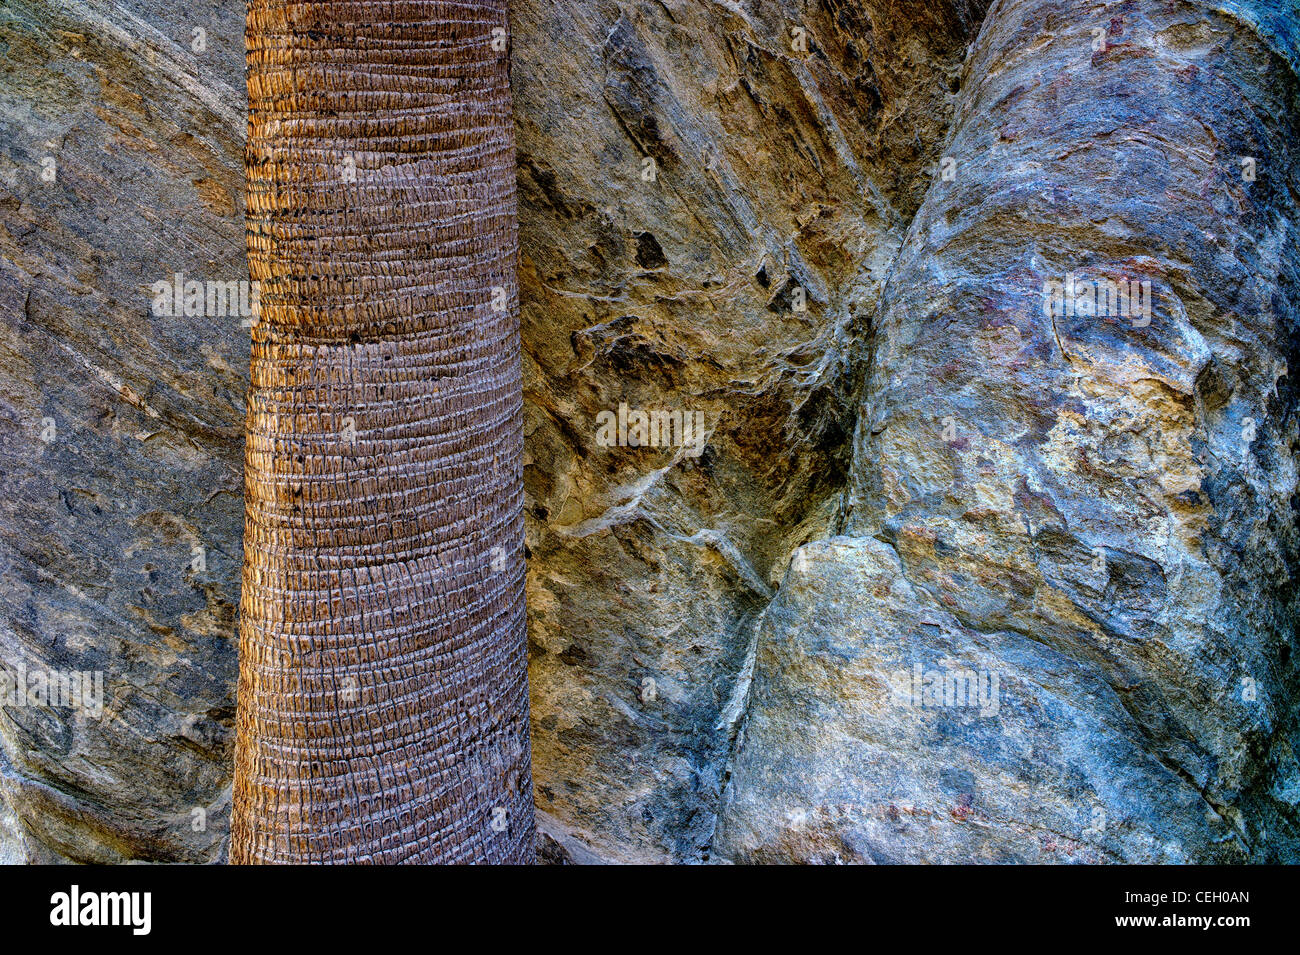 Close up of California Fan Palm tree trunk and rock wall. Murray Canyon. Indian Canyons. Palm Springs California Stock Photo